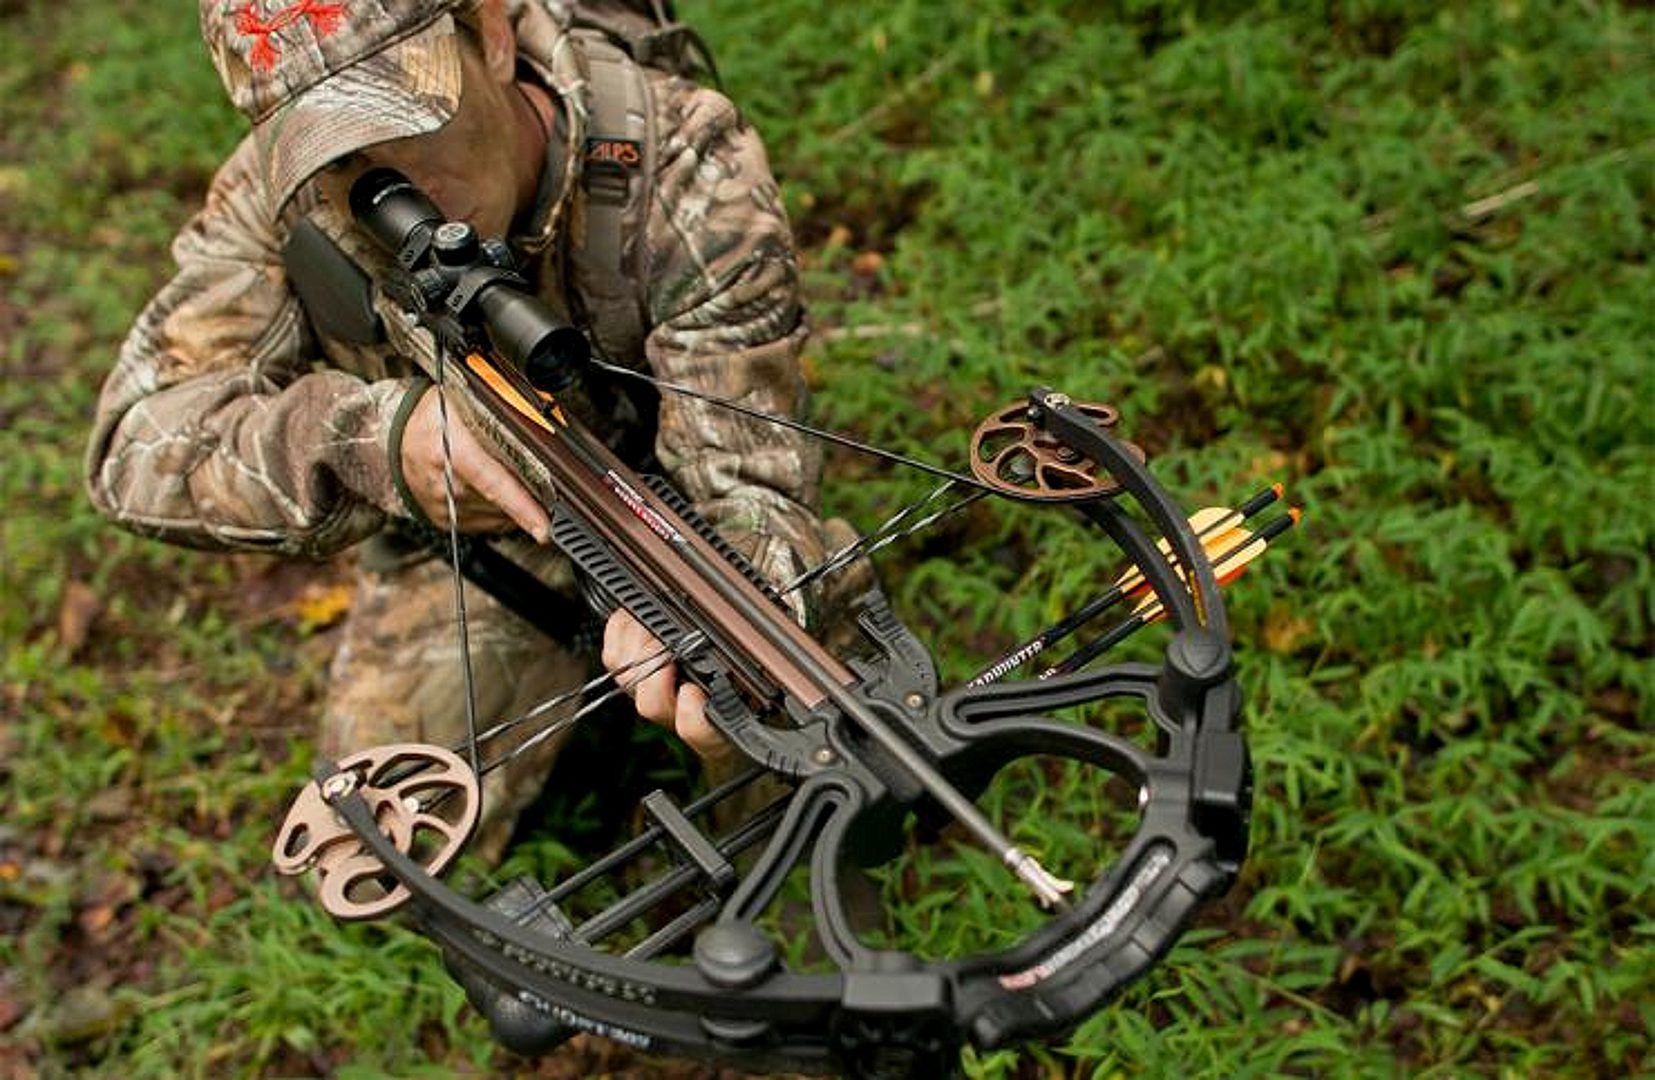 Why reliability is key When choosing a crossbow